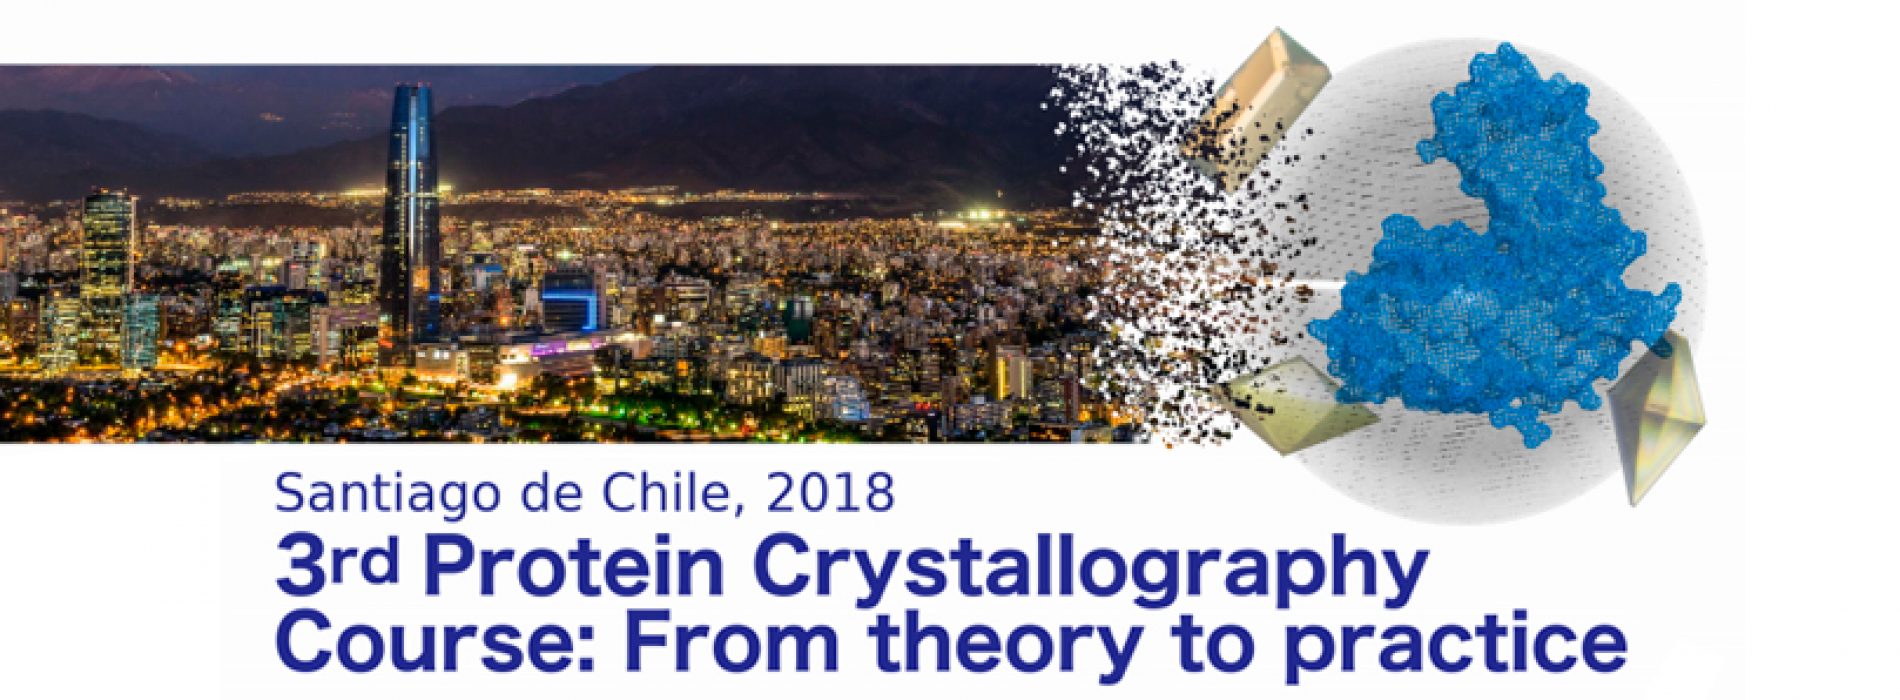 3rd Protein Crystallography Course: From theory to practice